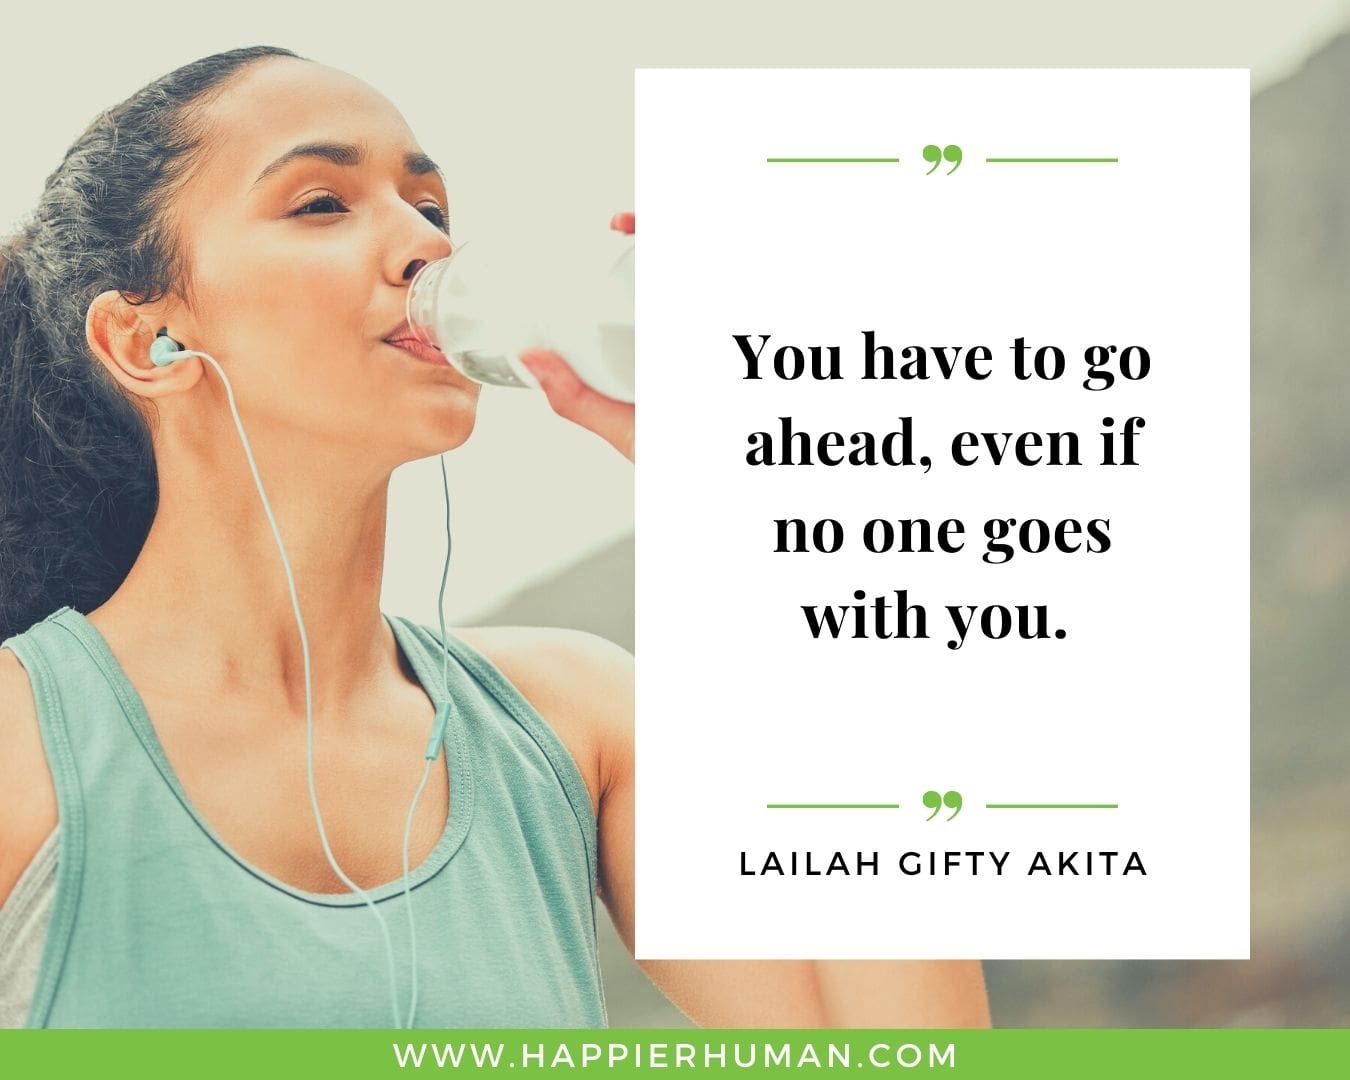 Loneliness Quotes - “You have to go ahead, even if no one goes with you.”– Lailah Gifty Akita